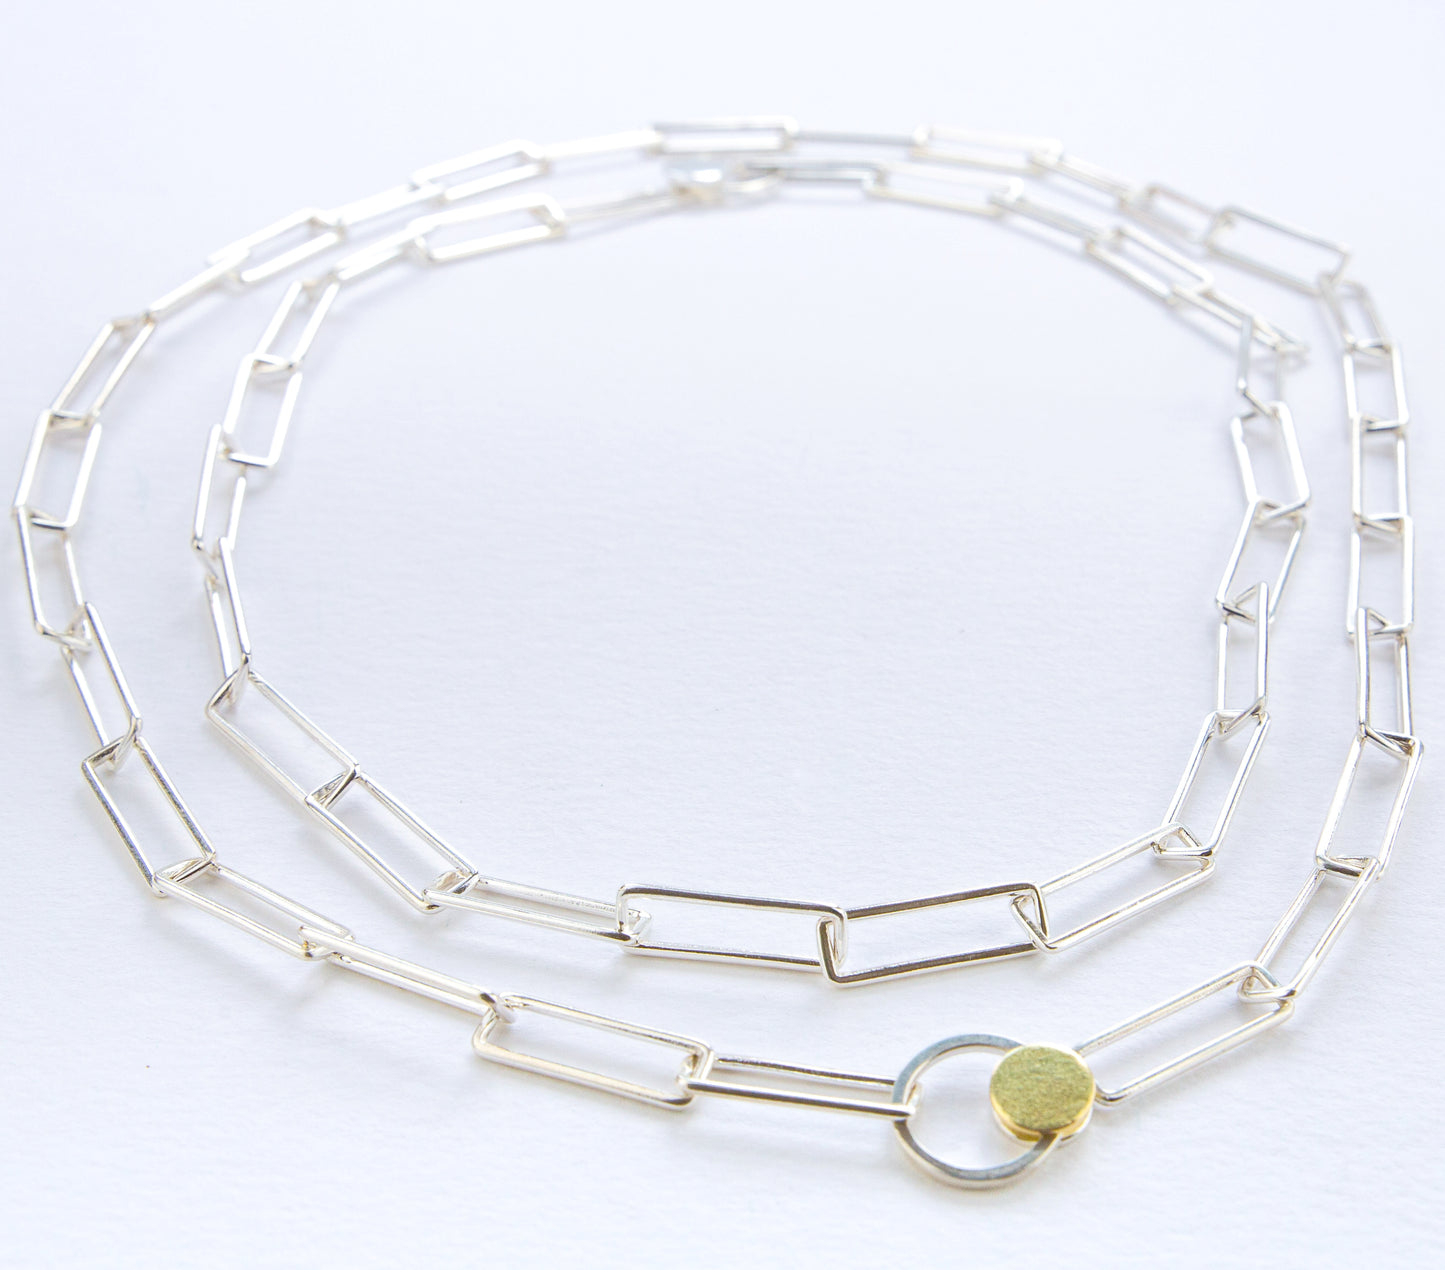 Orbit necklace with distinctive clasp in silver and gold www.barbaraspence.co.uk